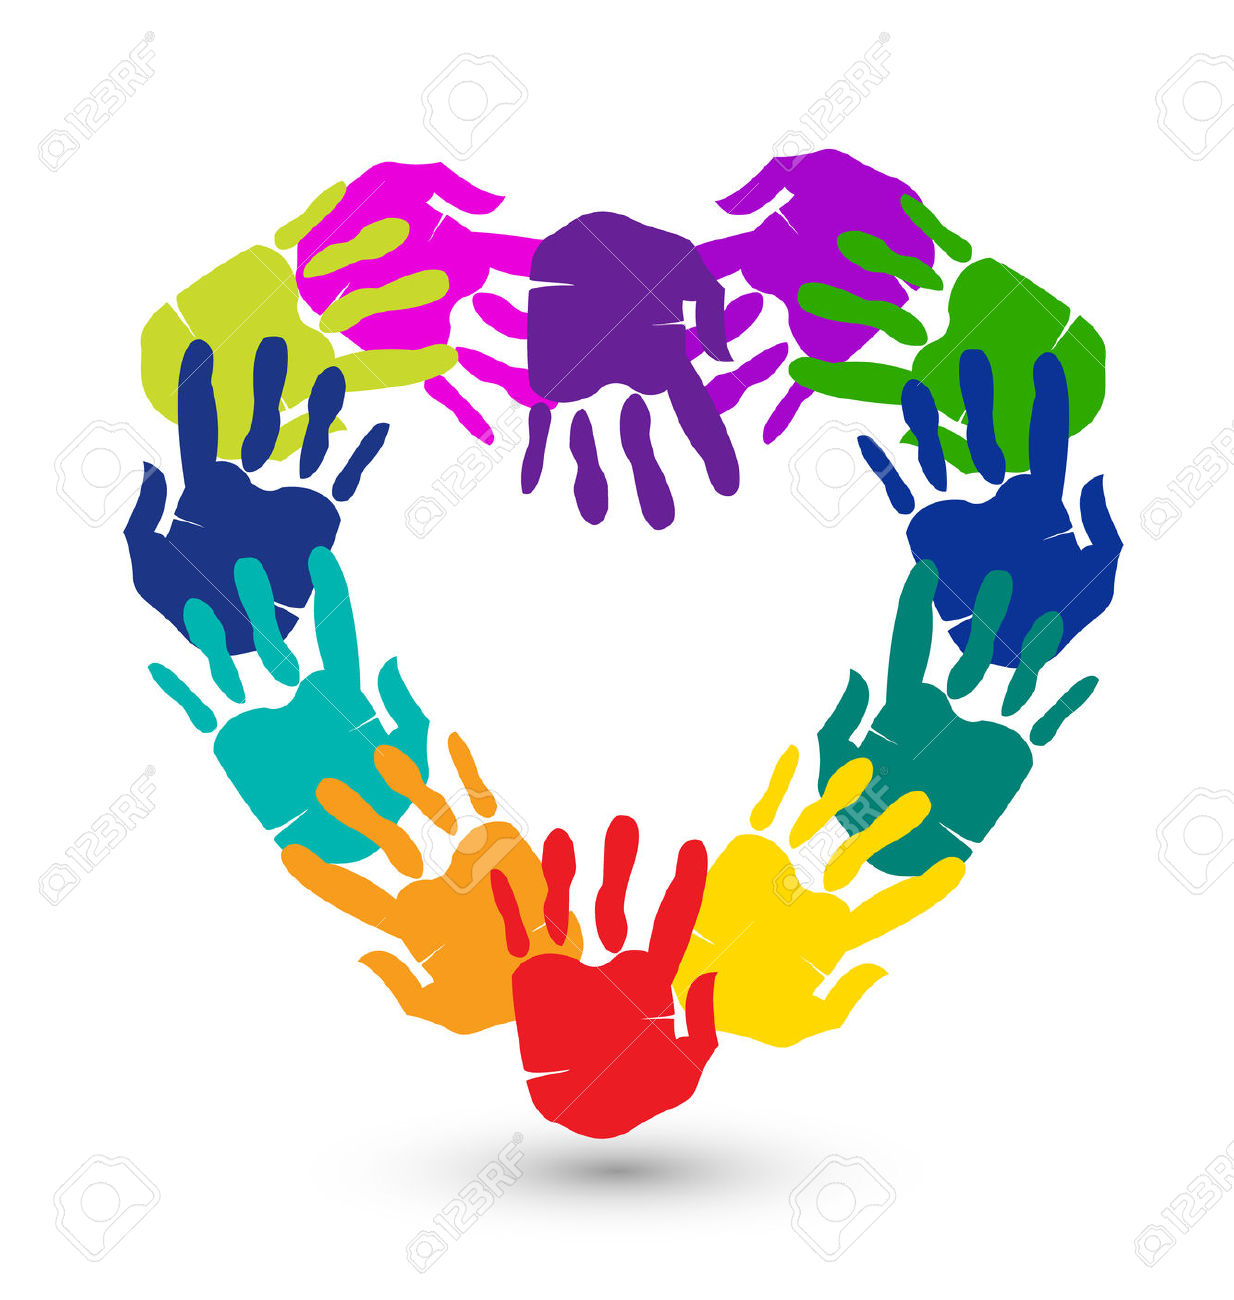 heart-in-hands-clipart-free-download-on-clipartmag